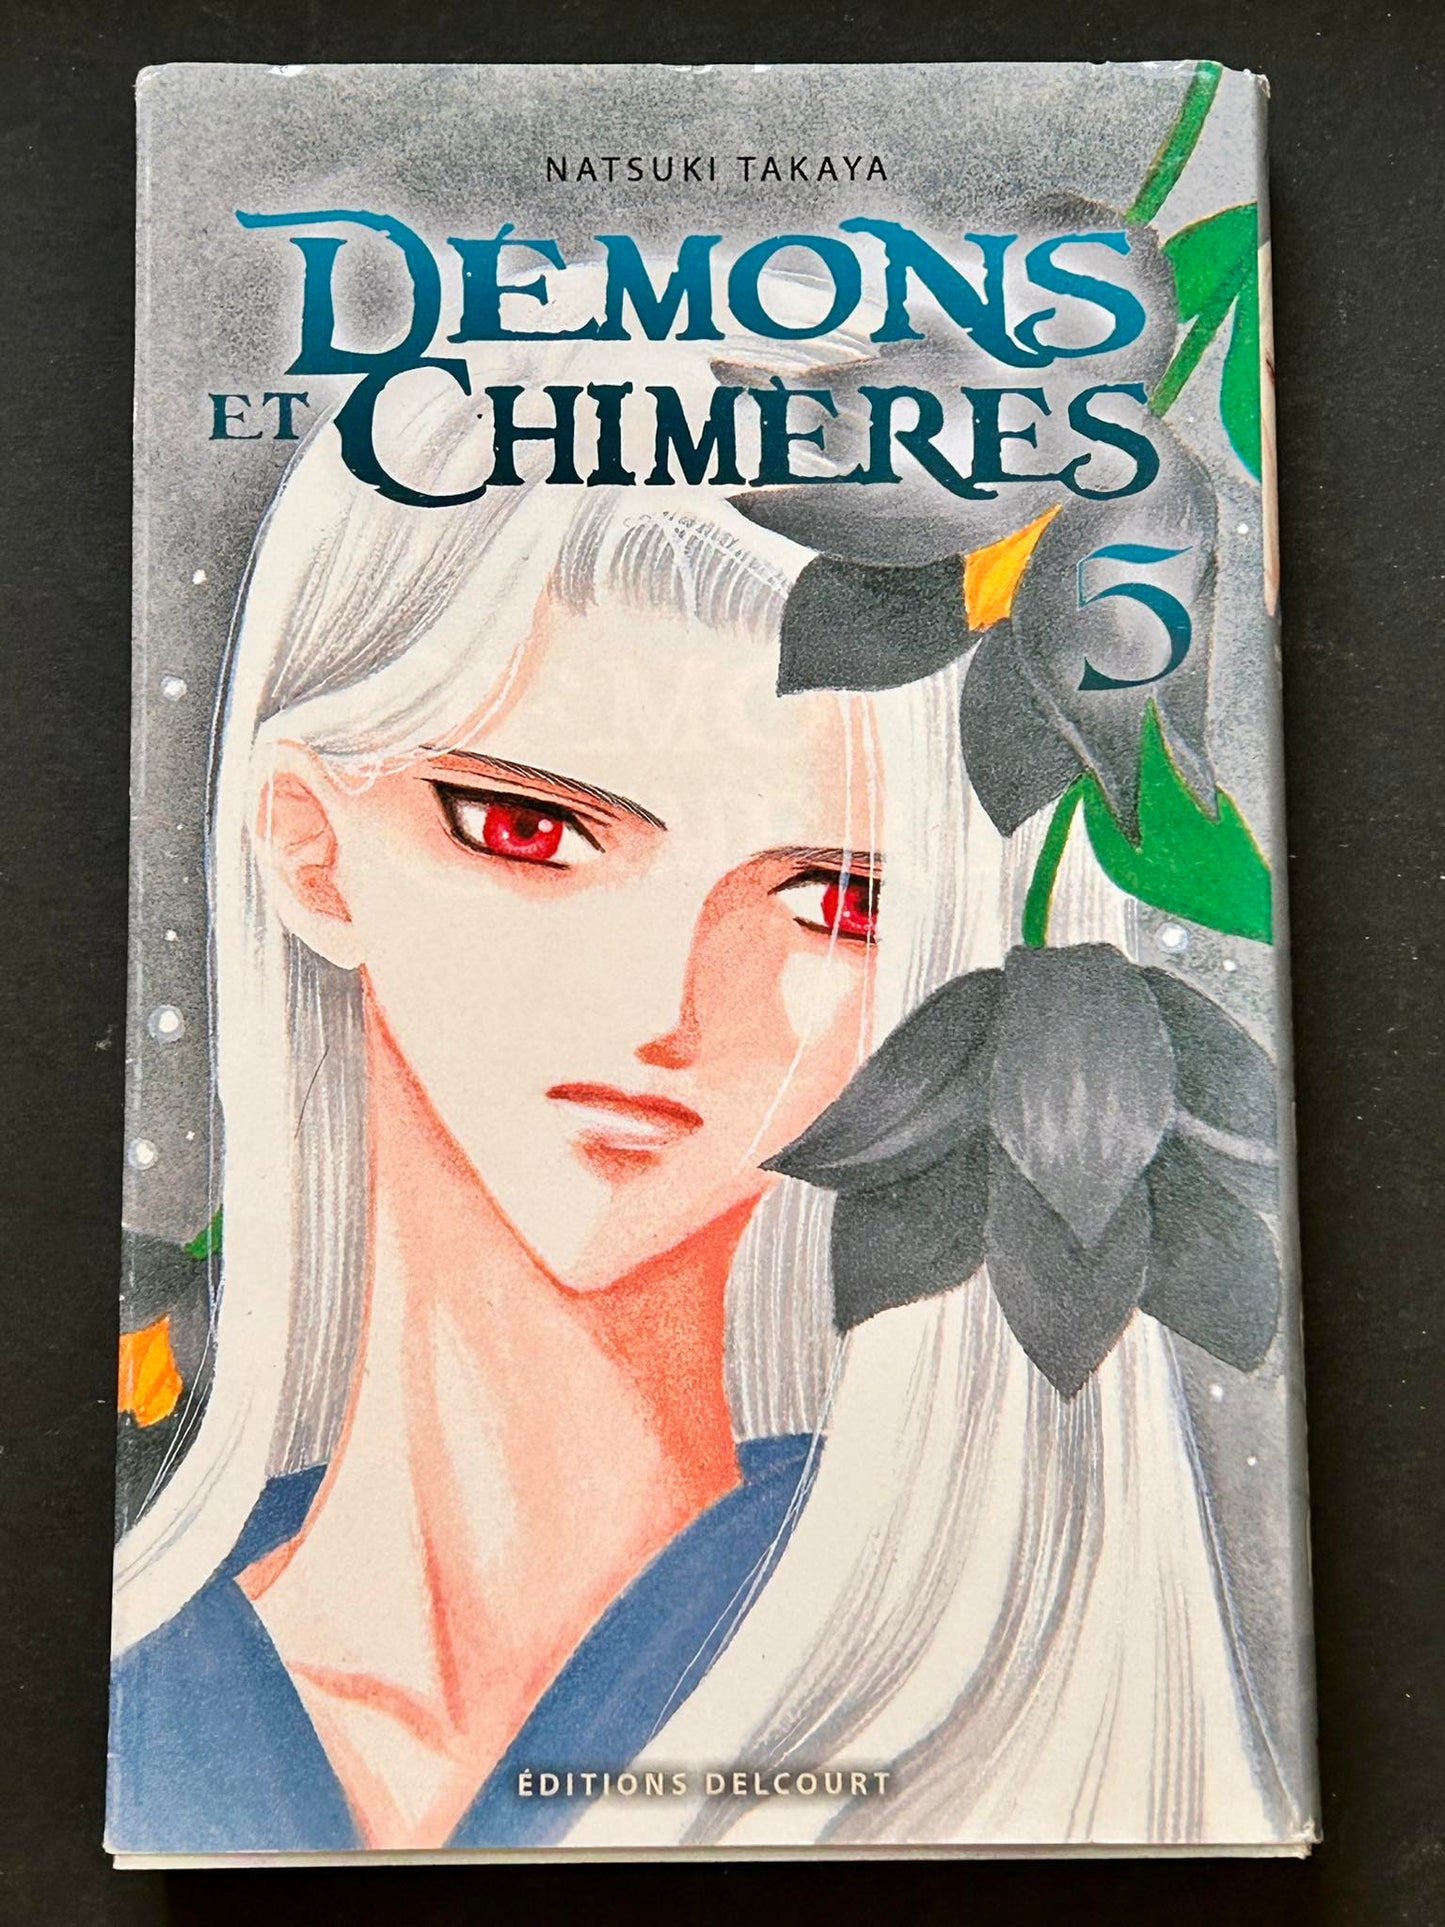 Demons and Chimeras, volume 5